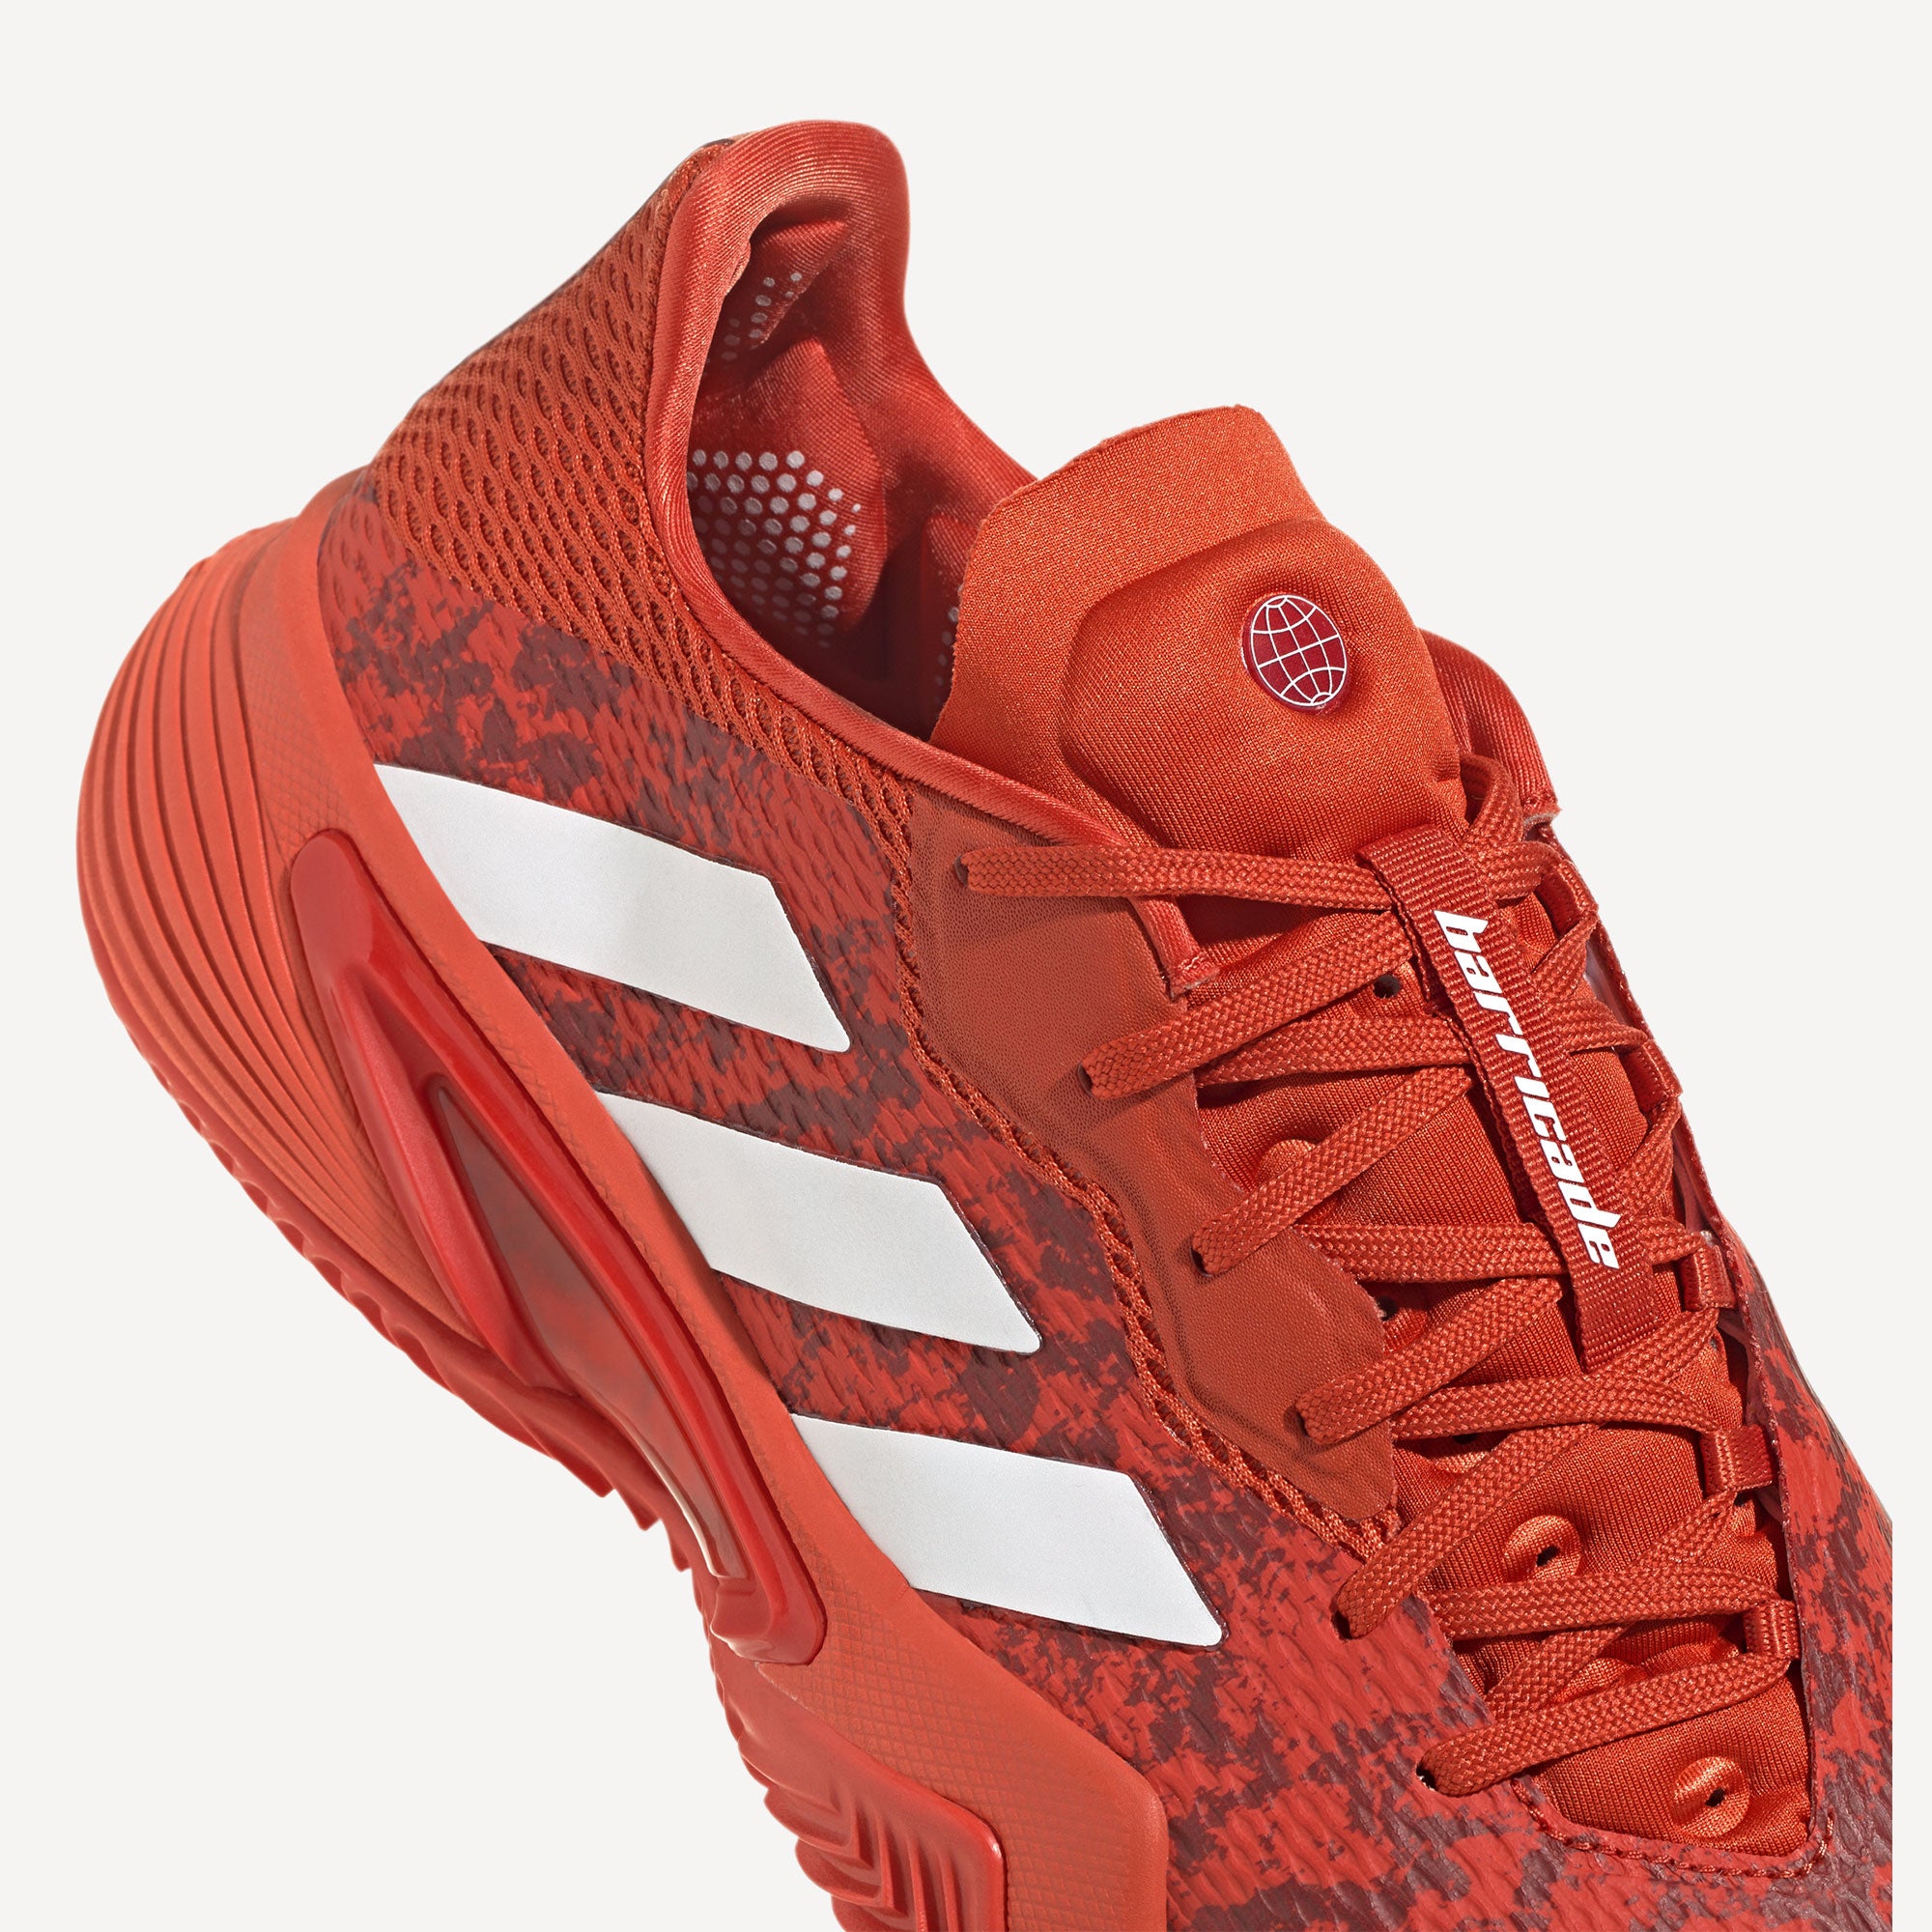 adidas Barricade Men's Clay Court Tennis Shoes Red (7)